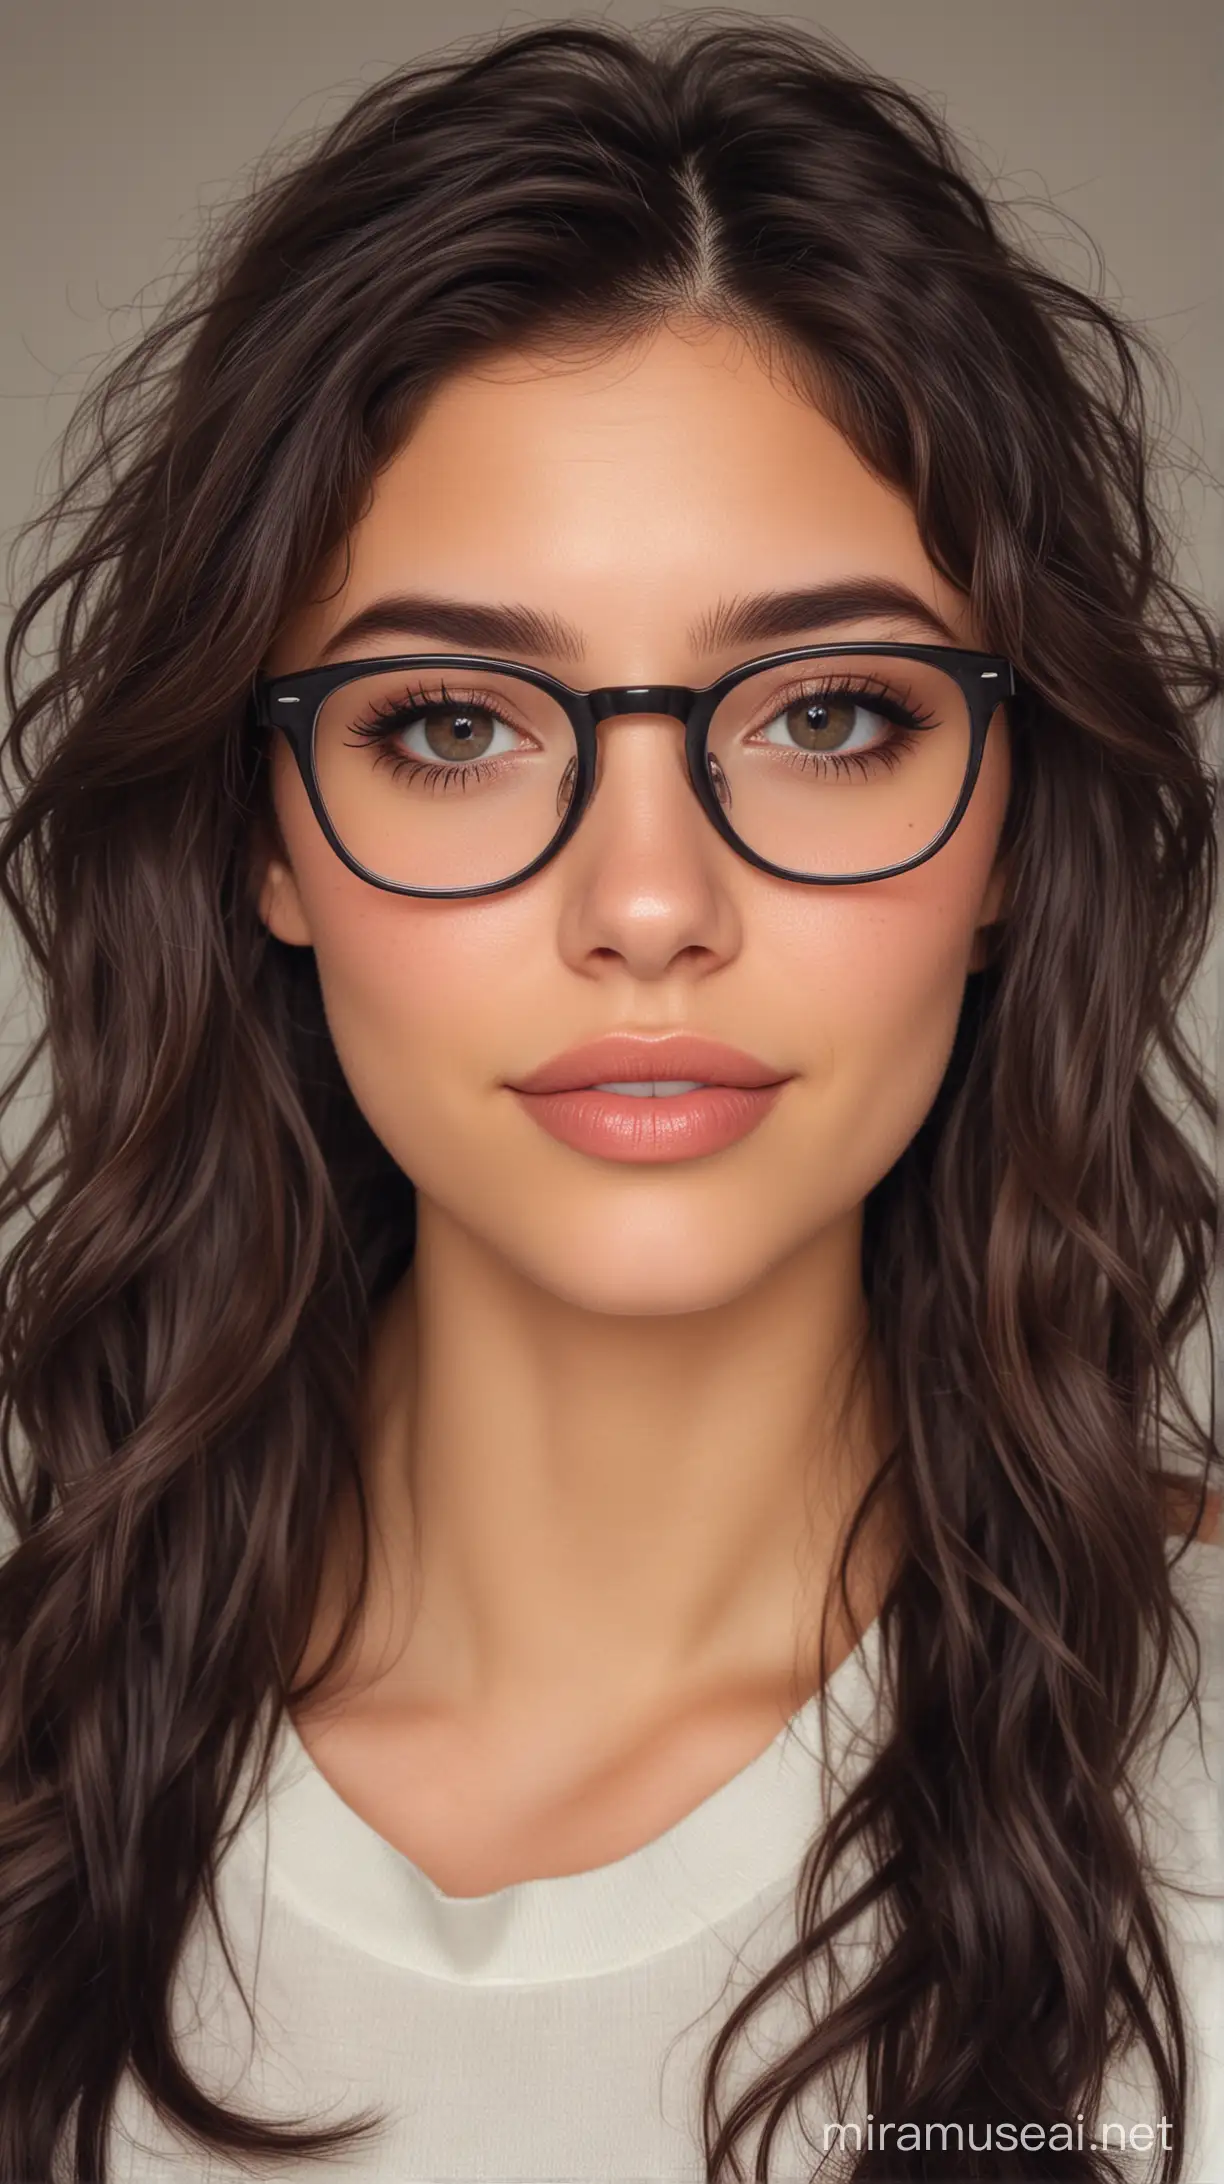 Portrait of a Pretty 26YearOld Woman with Wavy Dark Hair and Nerd Glasses